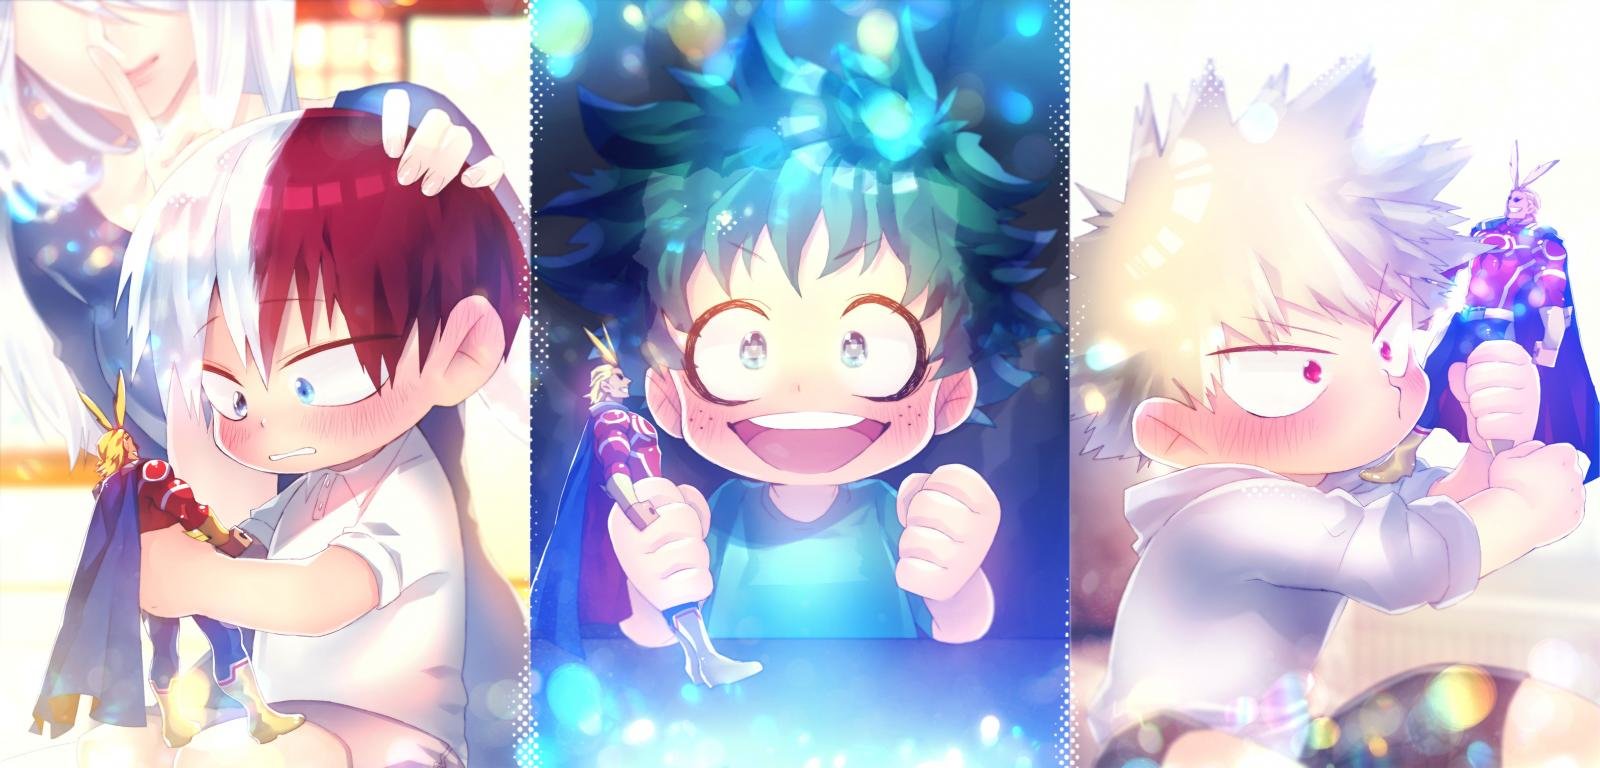 327 Boku No Hero Academia Wallpapers for iPhone and Android by Lee Martin